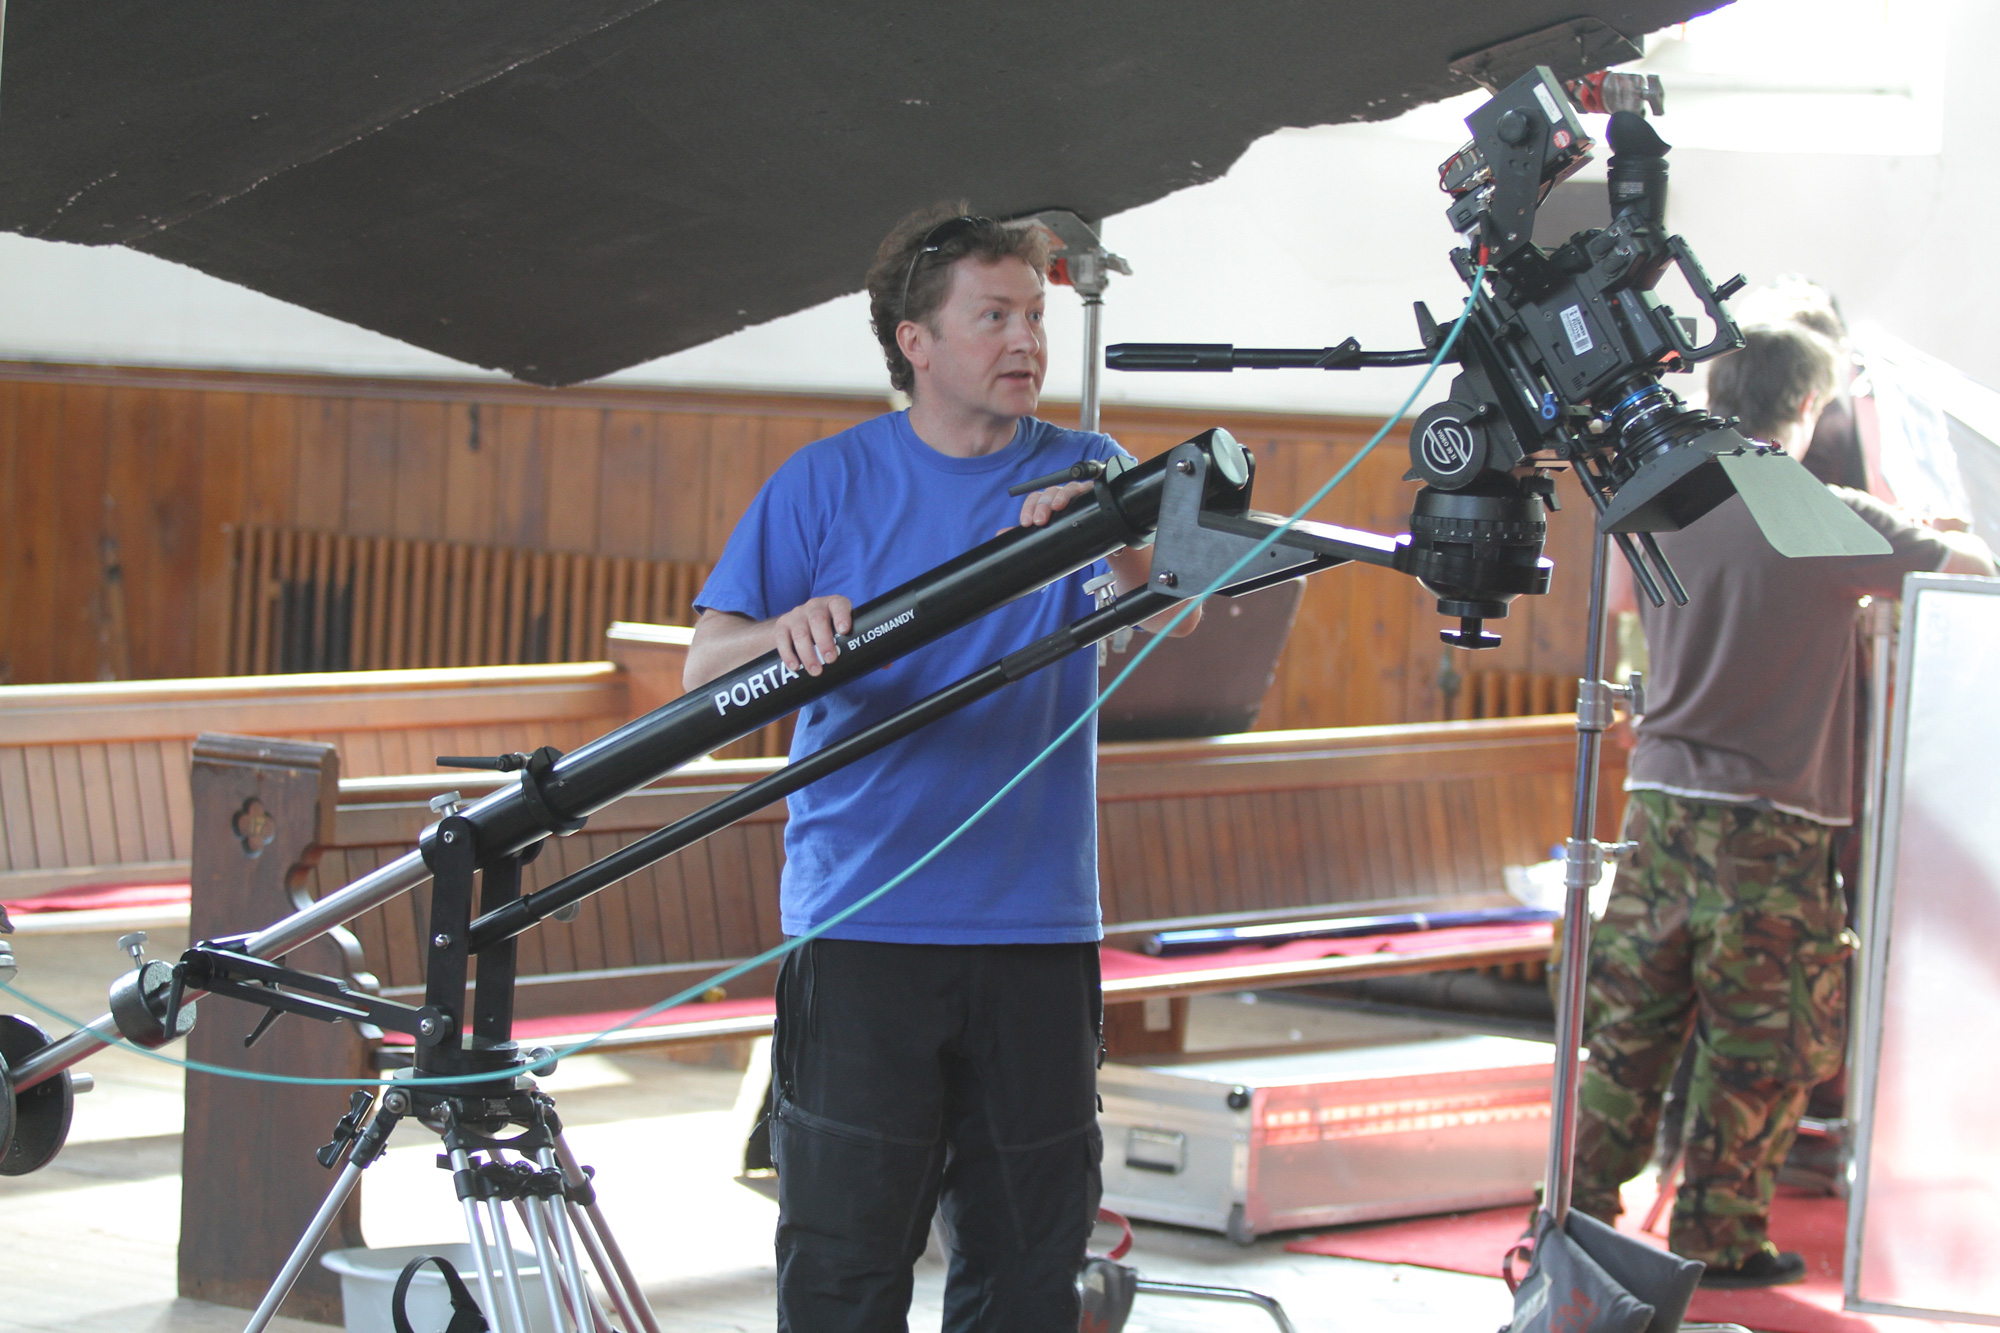 Filming the Reverend in Wales. Setting up the jib shot over Stuarts body